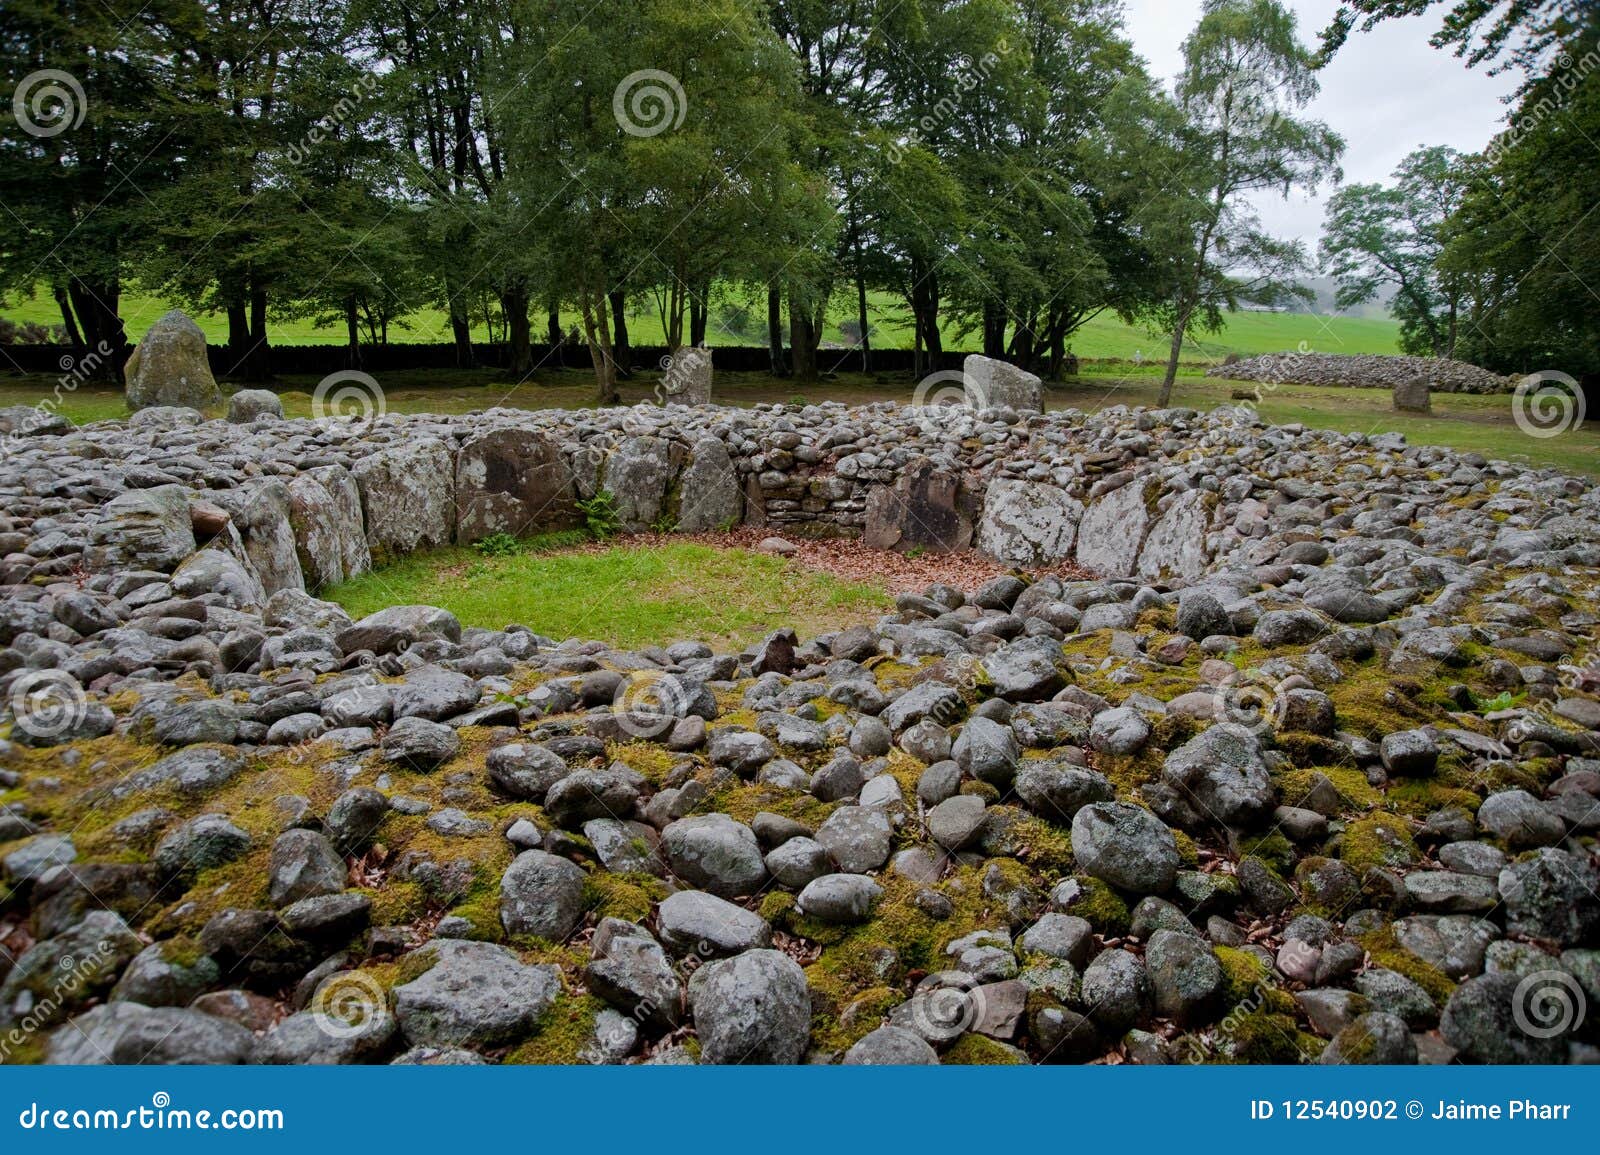 chambered cairn